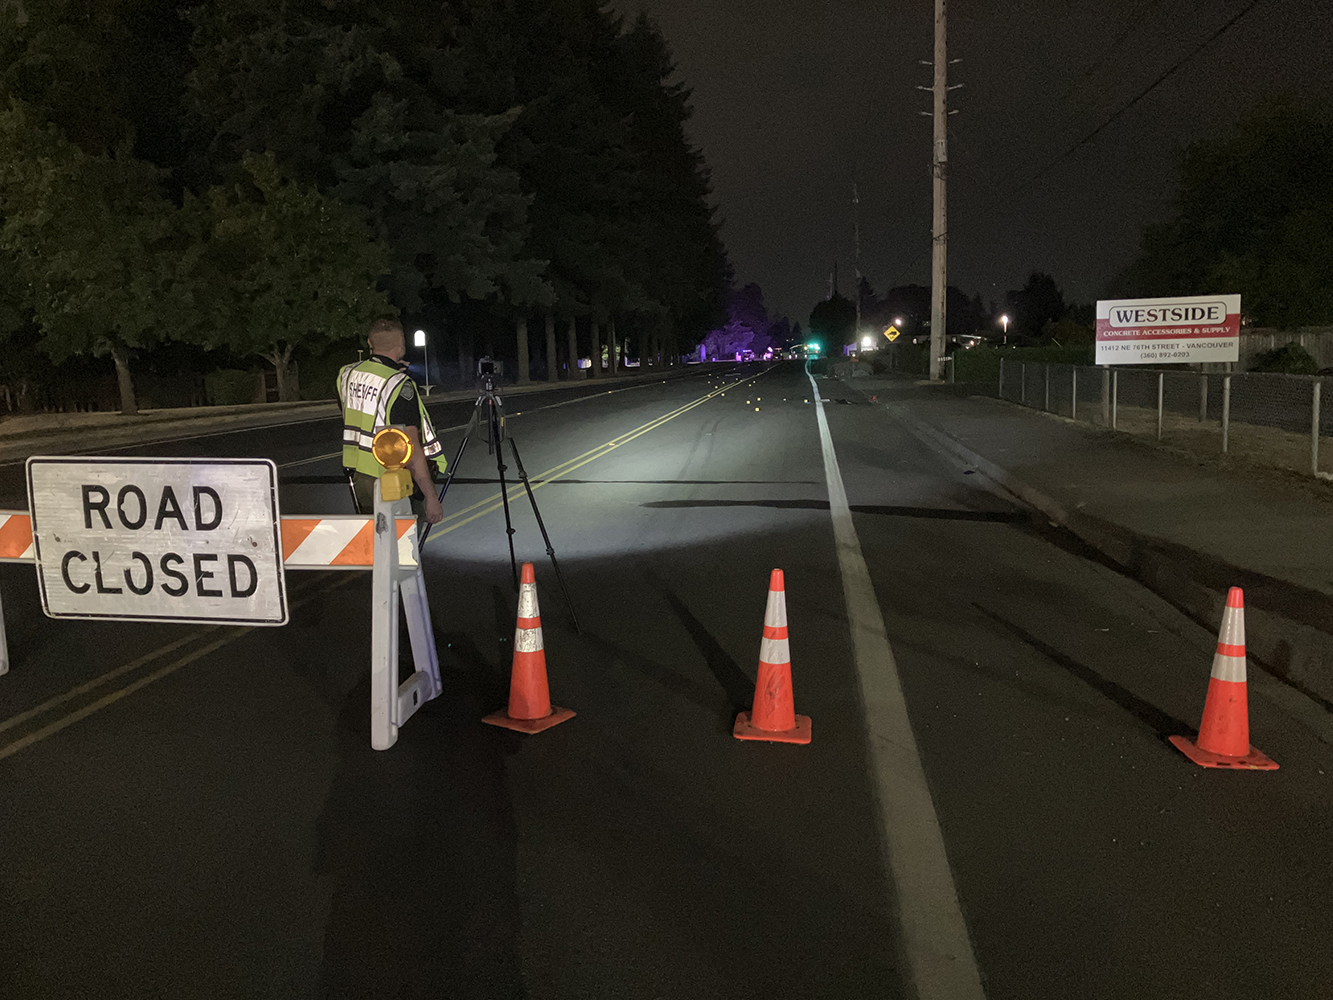 Two people were taken to the hospital Saturday with serious injuries after a pedestrian was hit by a motorcycle on Northeast 76th Street, west of the intersection with Northeast 117th Avenue in Orchards, according to a press release from the Clark County Sheriff’s Office.